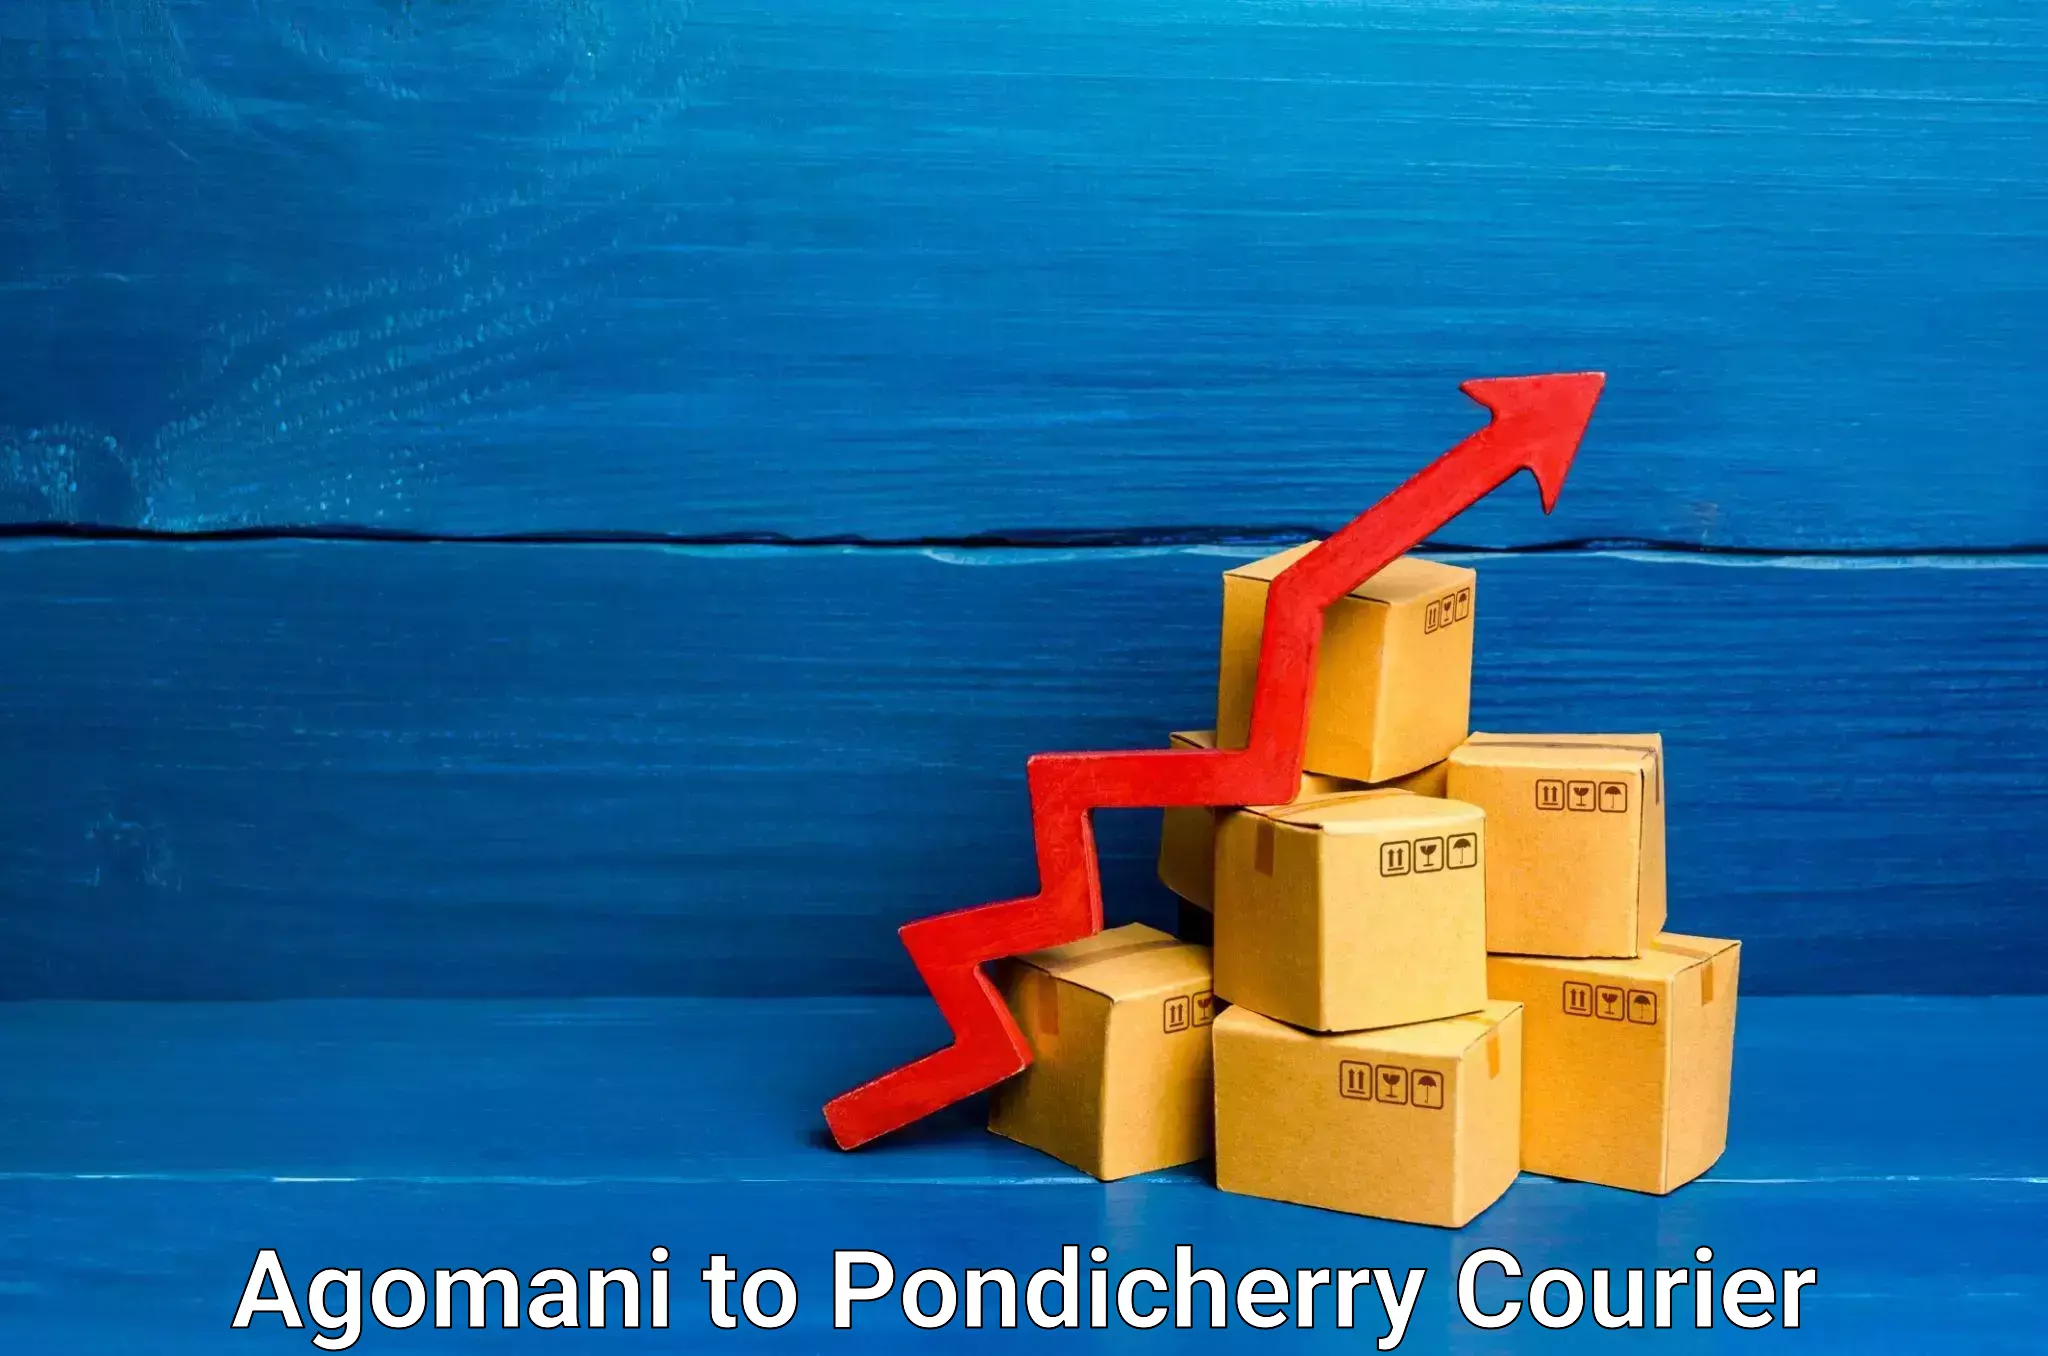 Courier service innovation in Agomani to Pondicherry